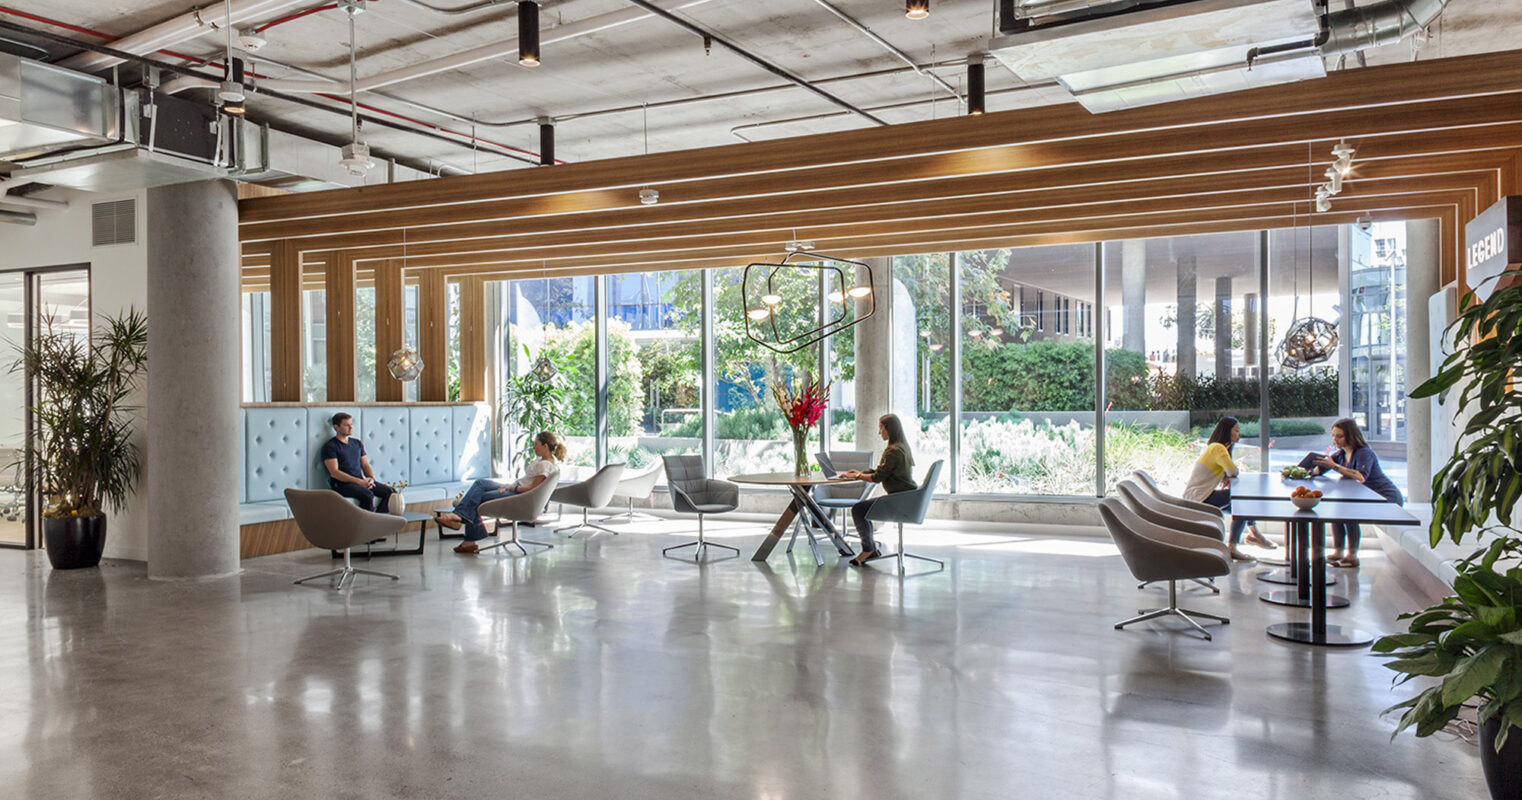 Modern open-plan office space featuring exposed ceiling infrastructure paired with warm wooden accents, sleek furniture, and large glass windows providing ample natural light and a view of greenery outside.